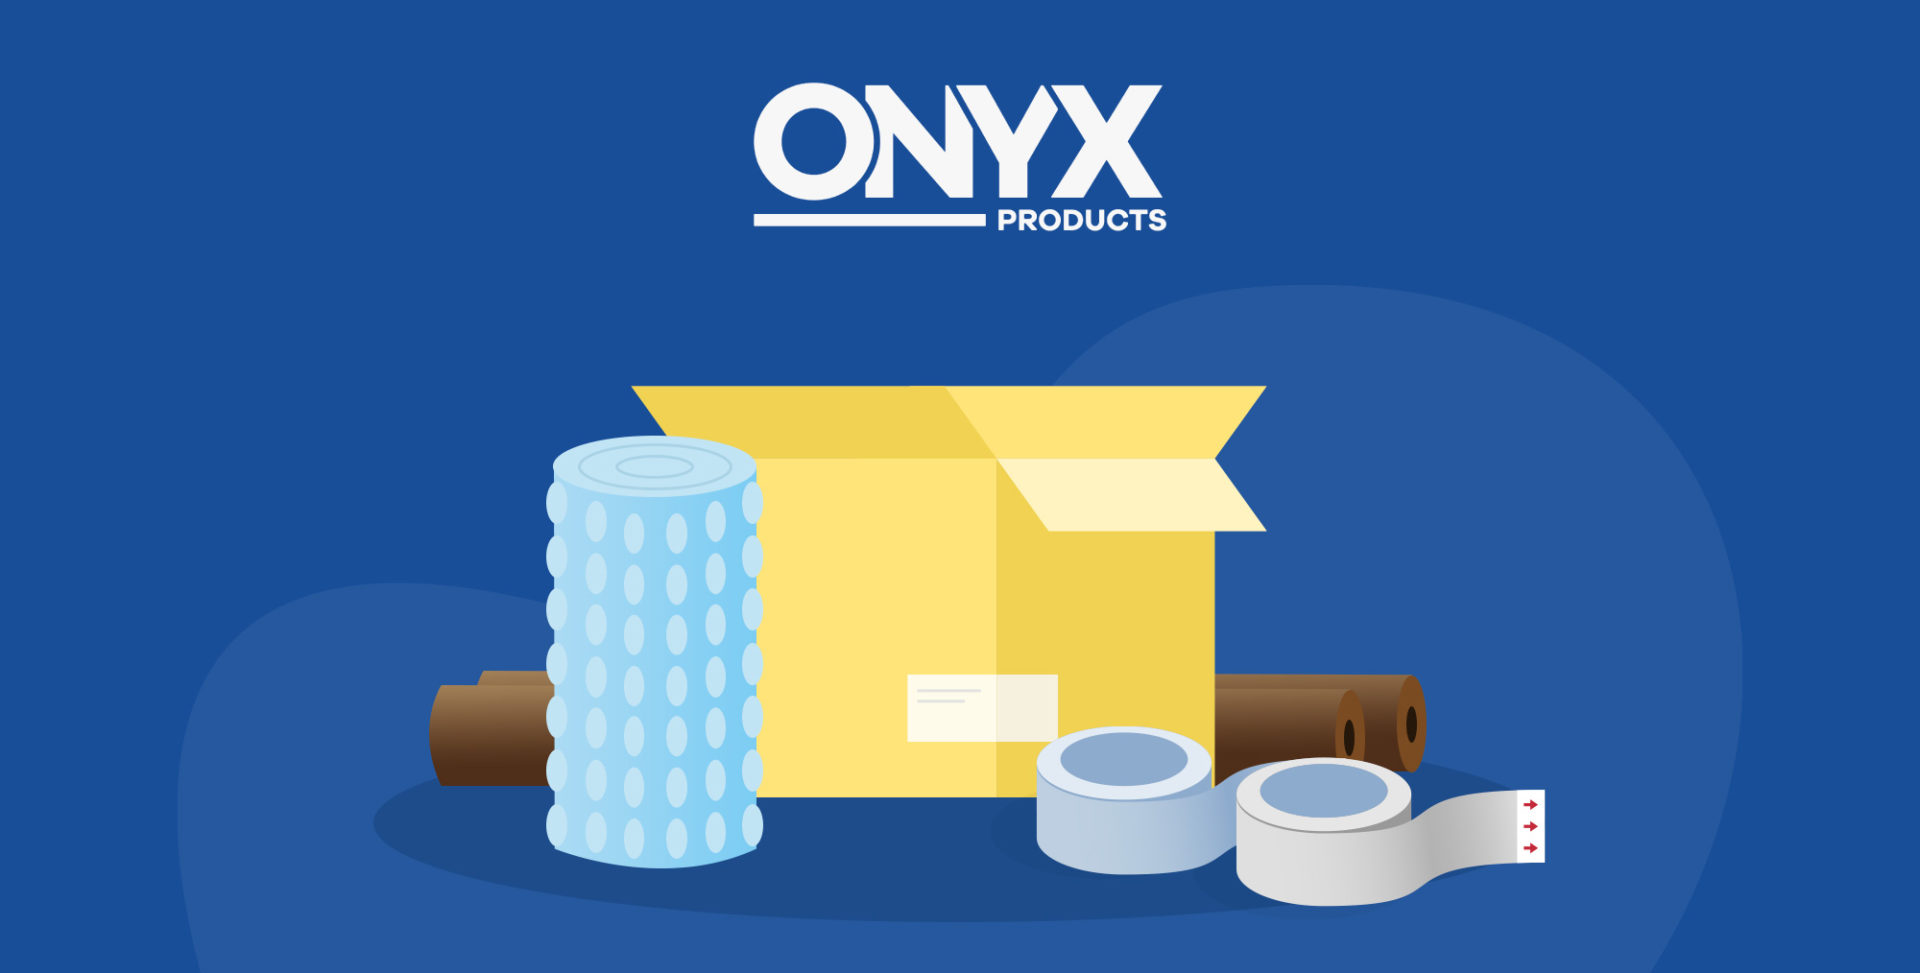 Onyx Products is ready to supply you with all your shipping needs!